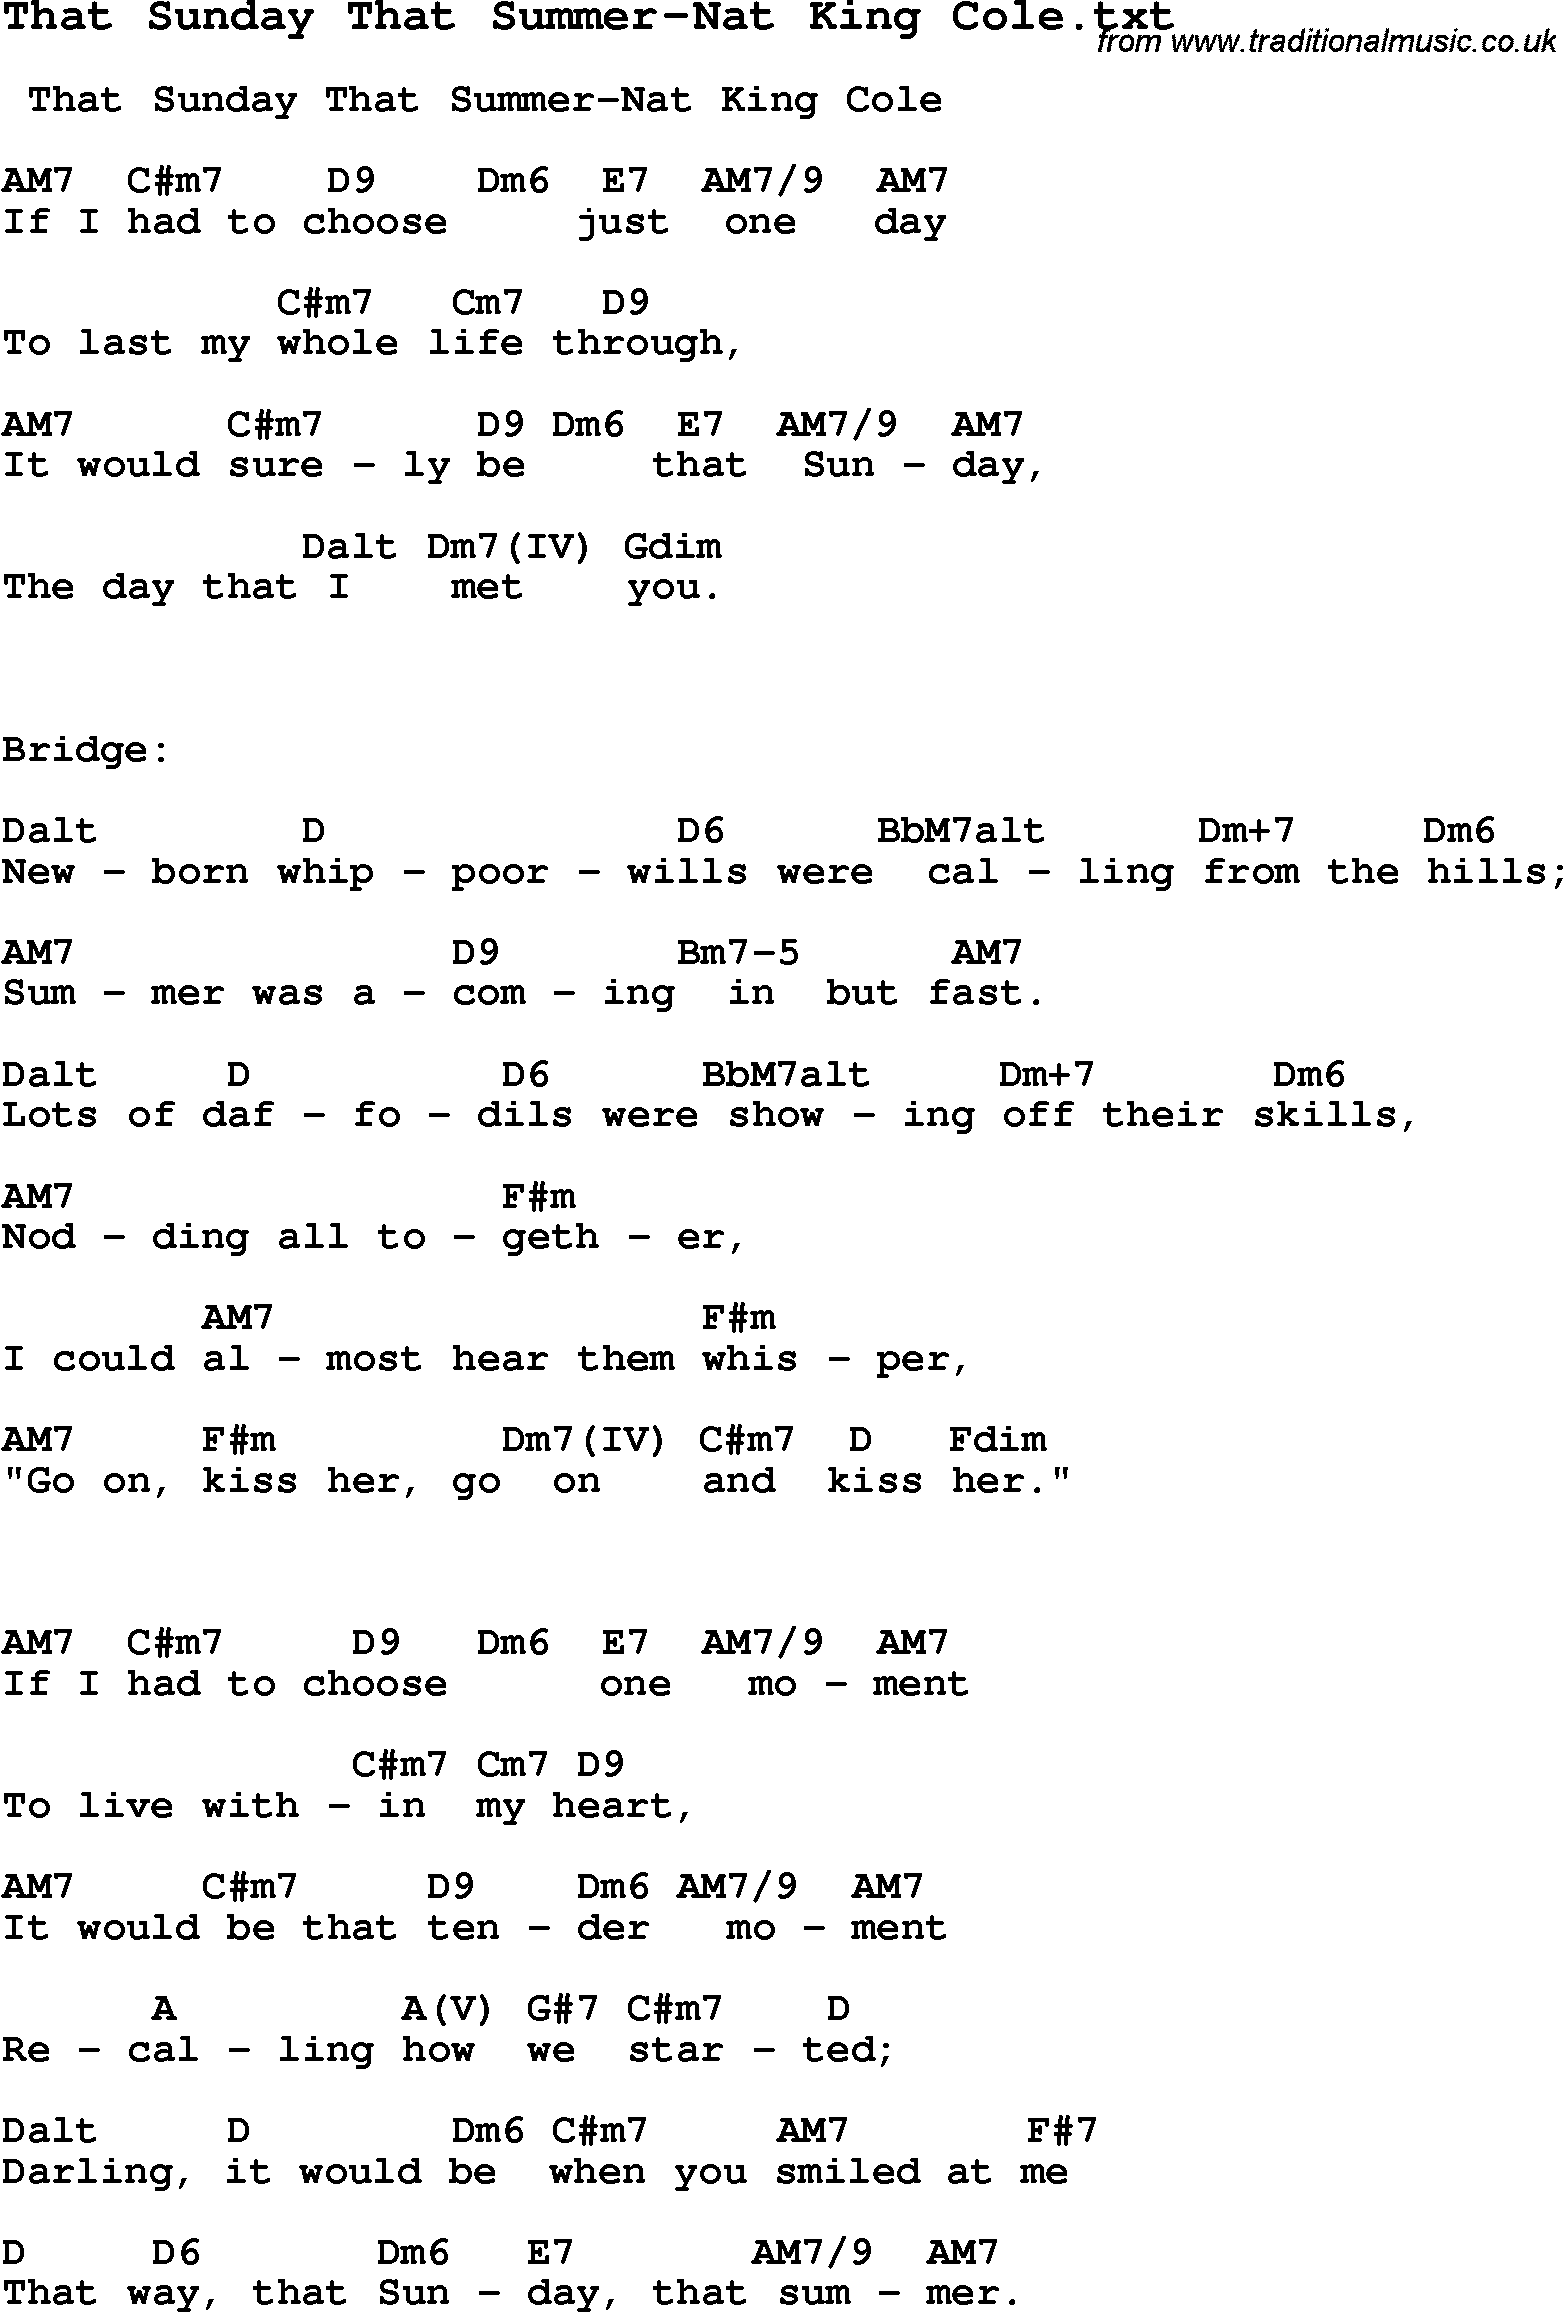 Jazz Song That Sunday That Summer Nat King Cole With Chords Tabs And Lyrics From Top Bands